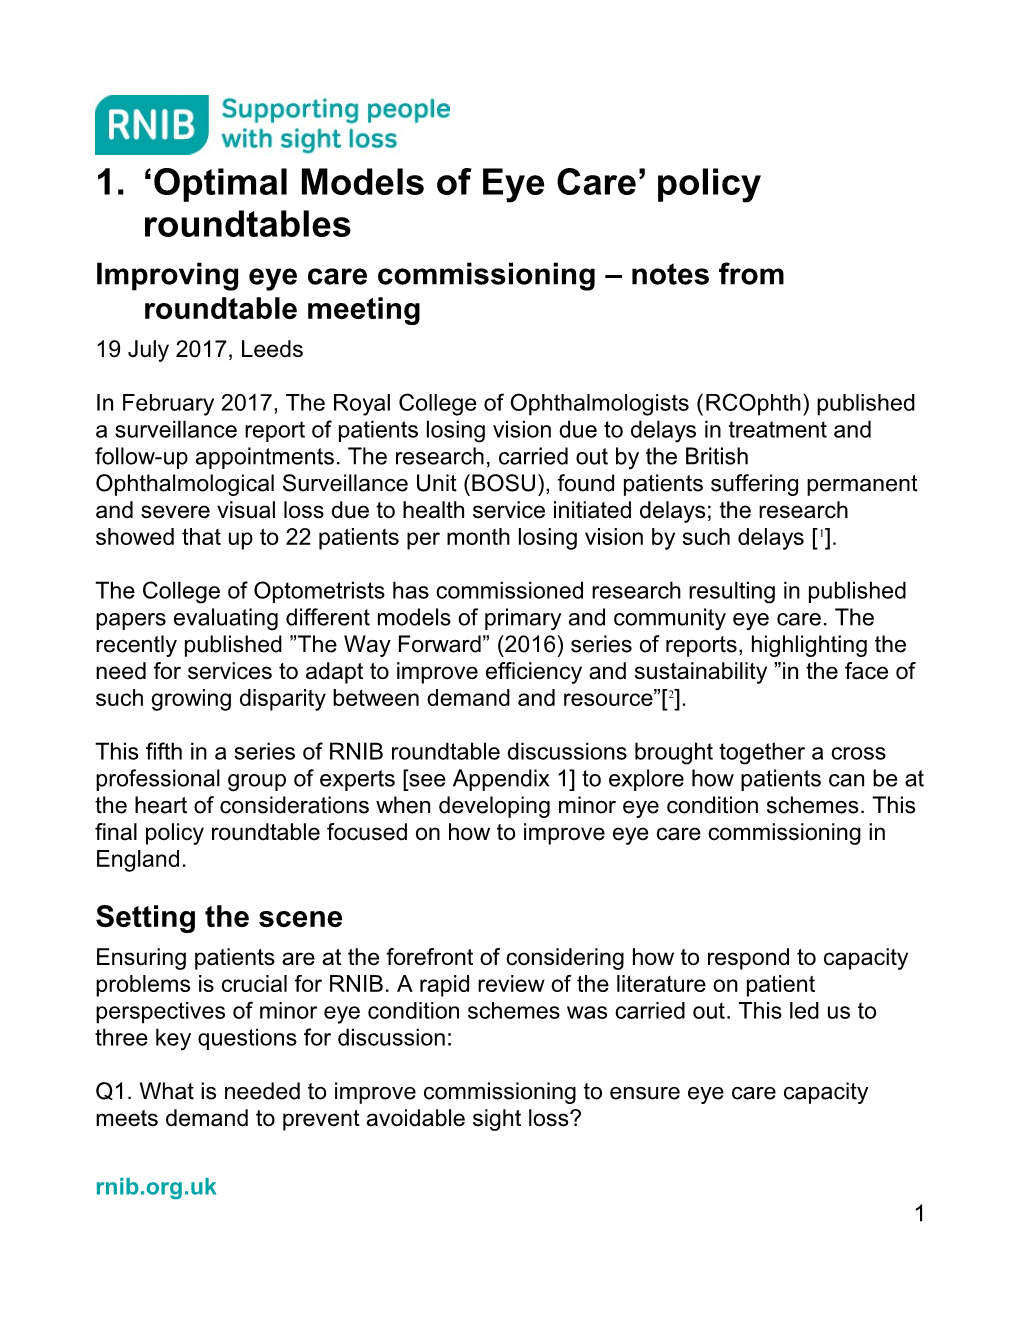 Optimal Models of Eye Care Policy Roundtables